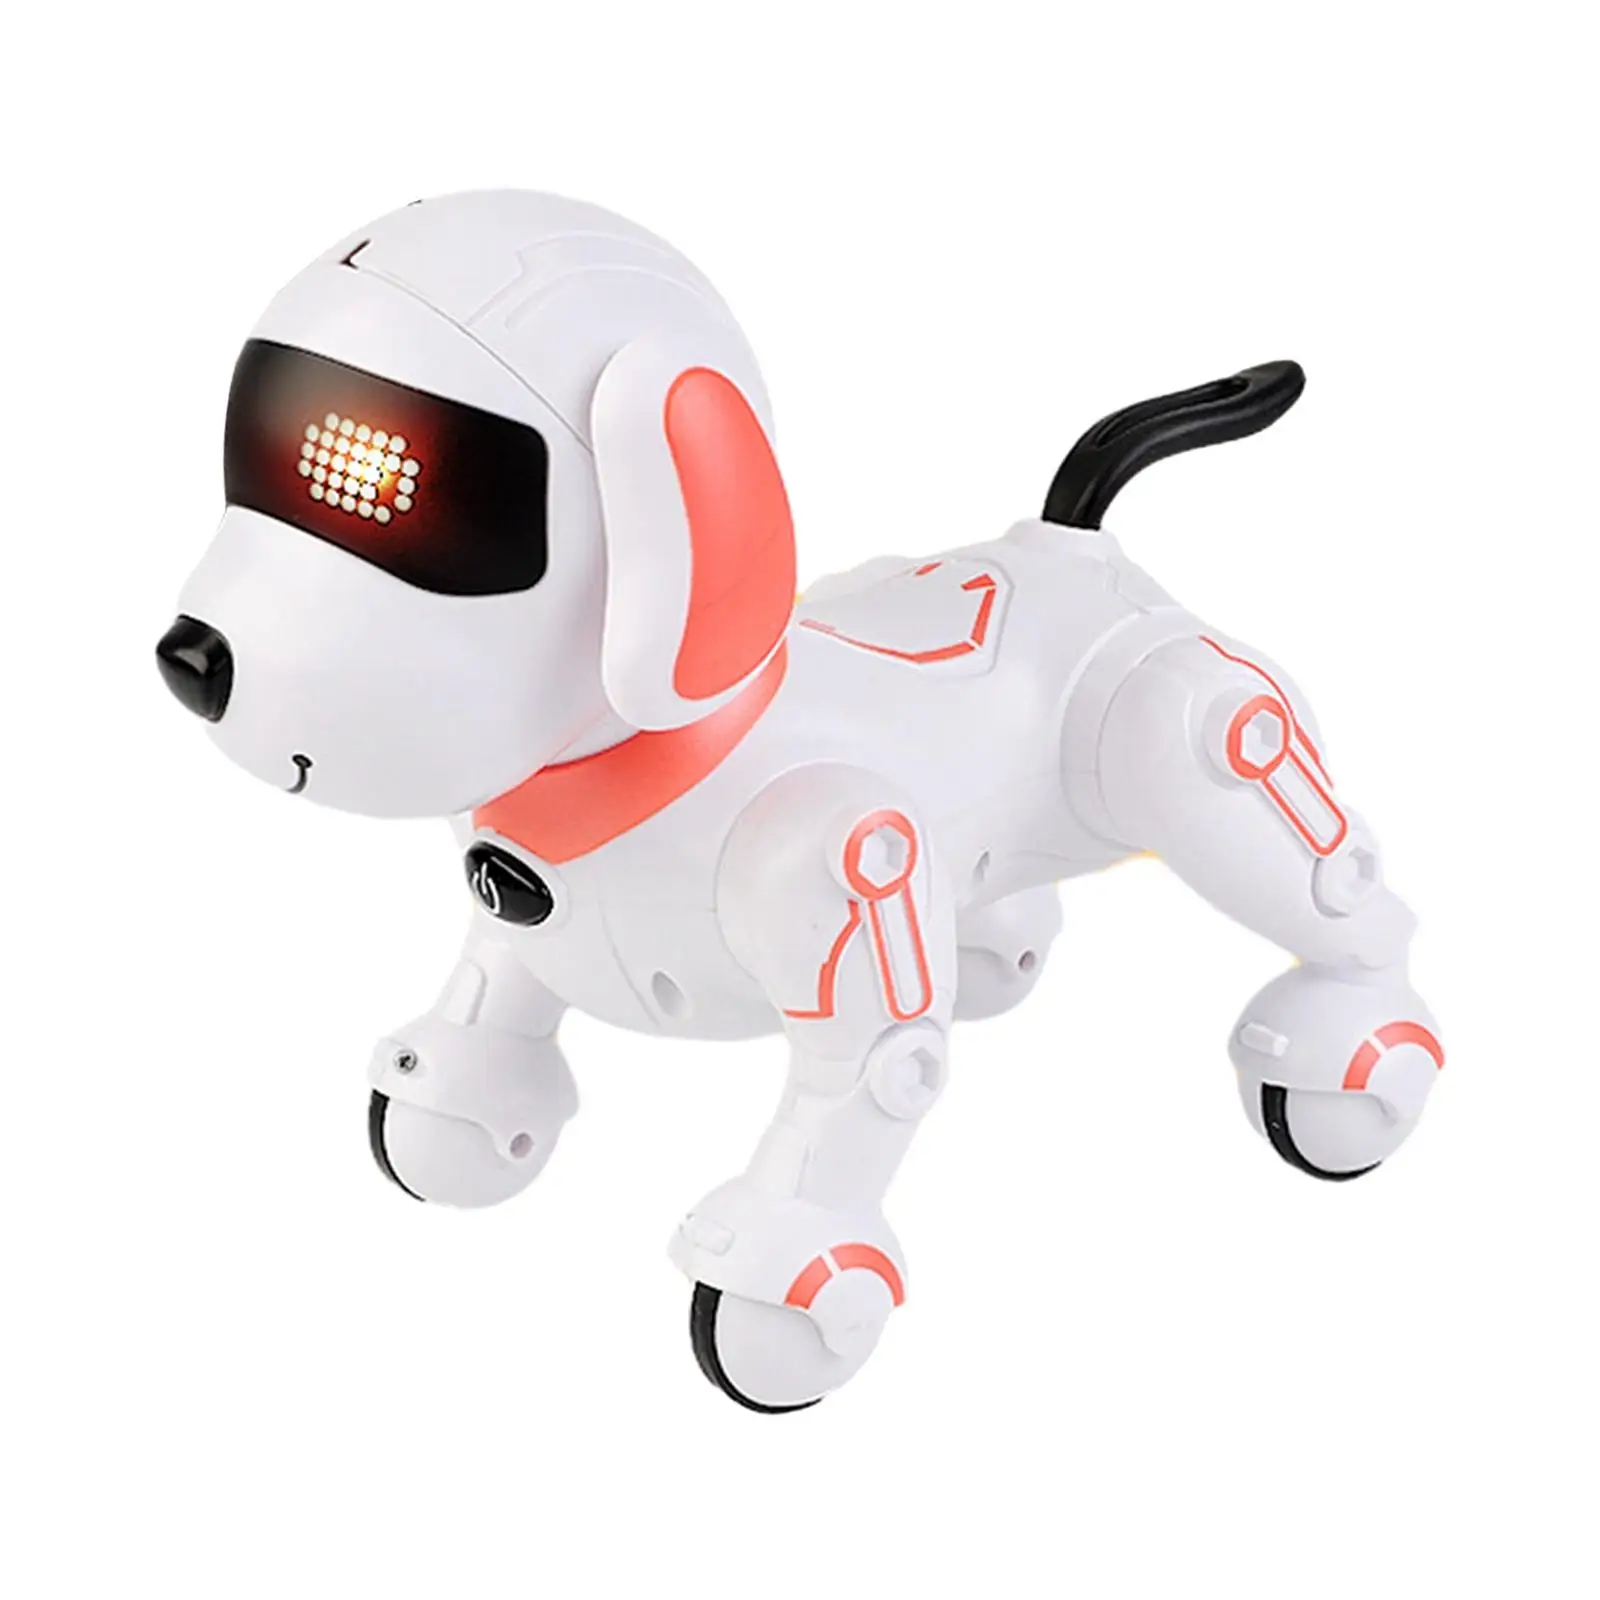 Remote Control Robot Dog Electronic Pet for 5 6 7 8 9 10 11 12 Children Kids